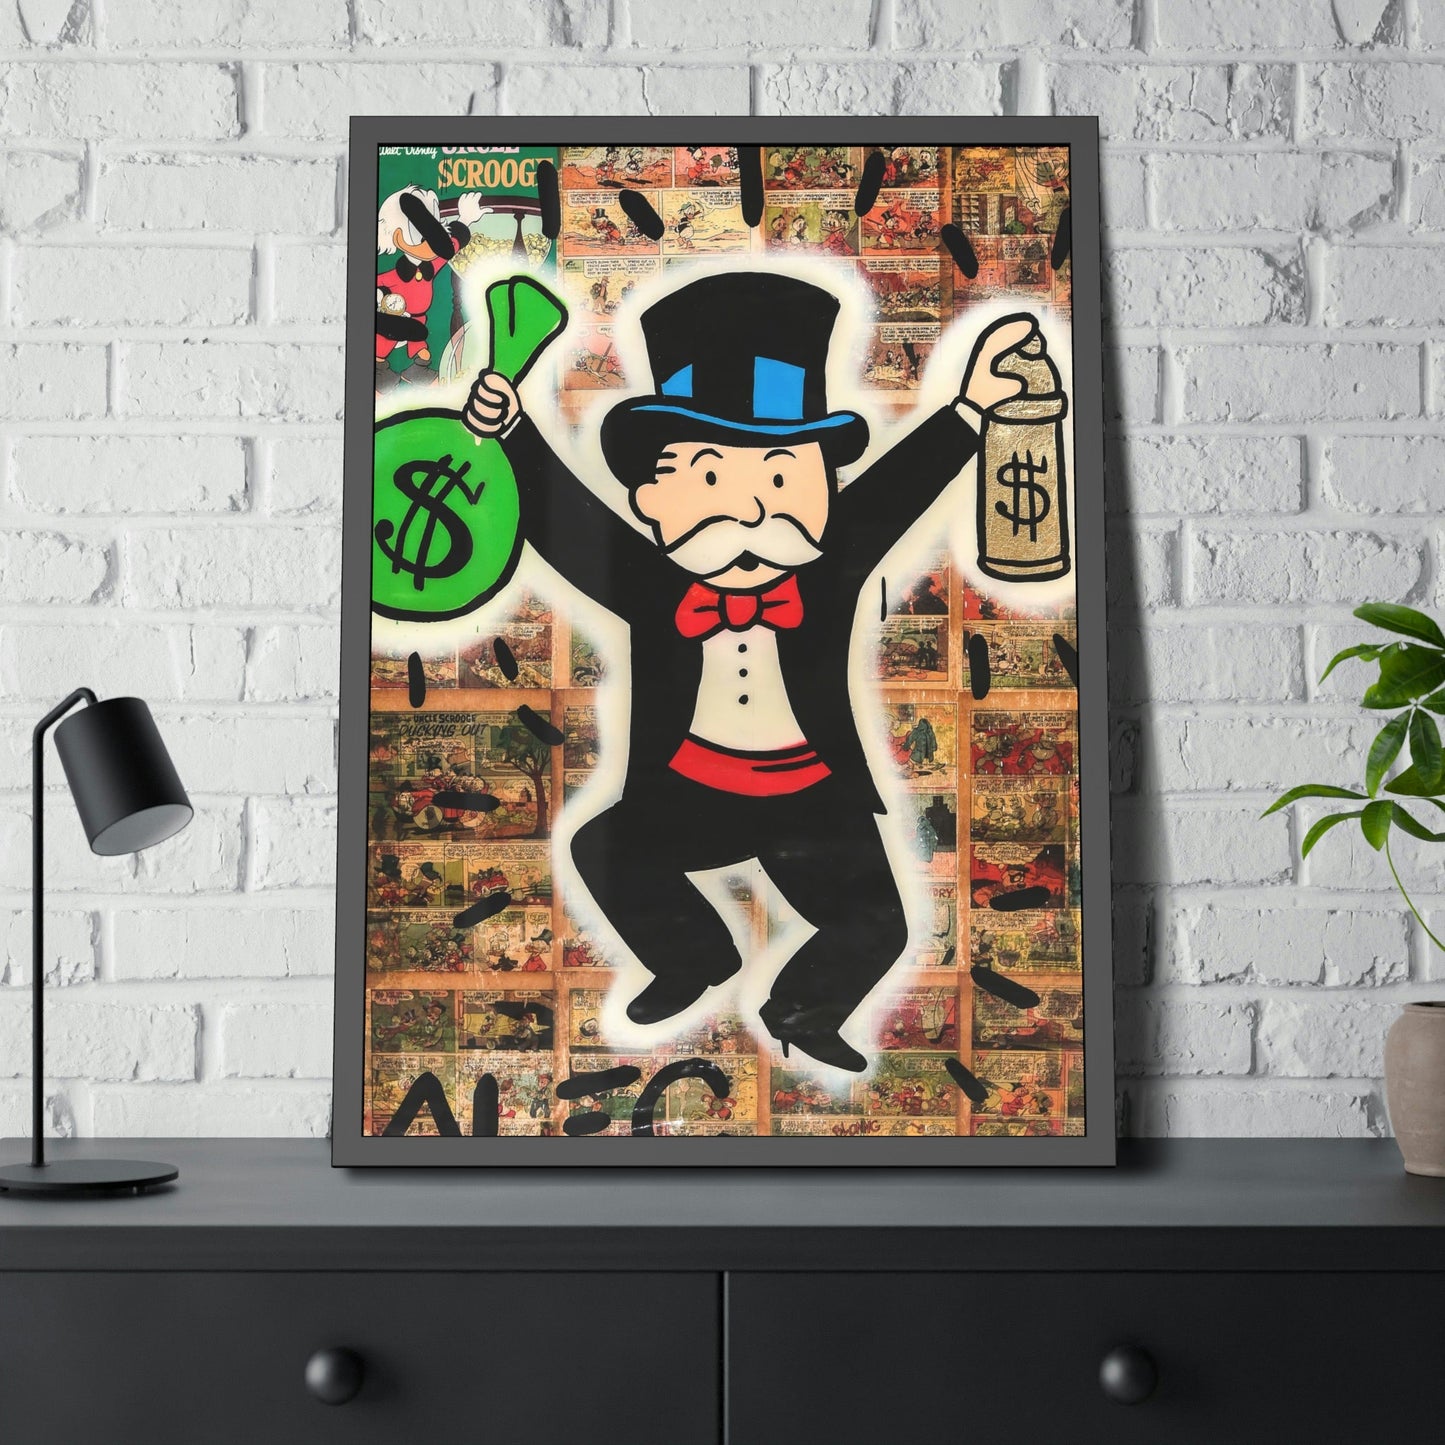 Money Talks: Framed Canvas and Poster Print of Alec Monopoly Art